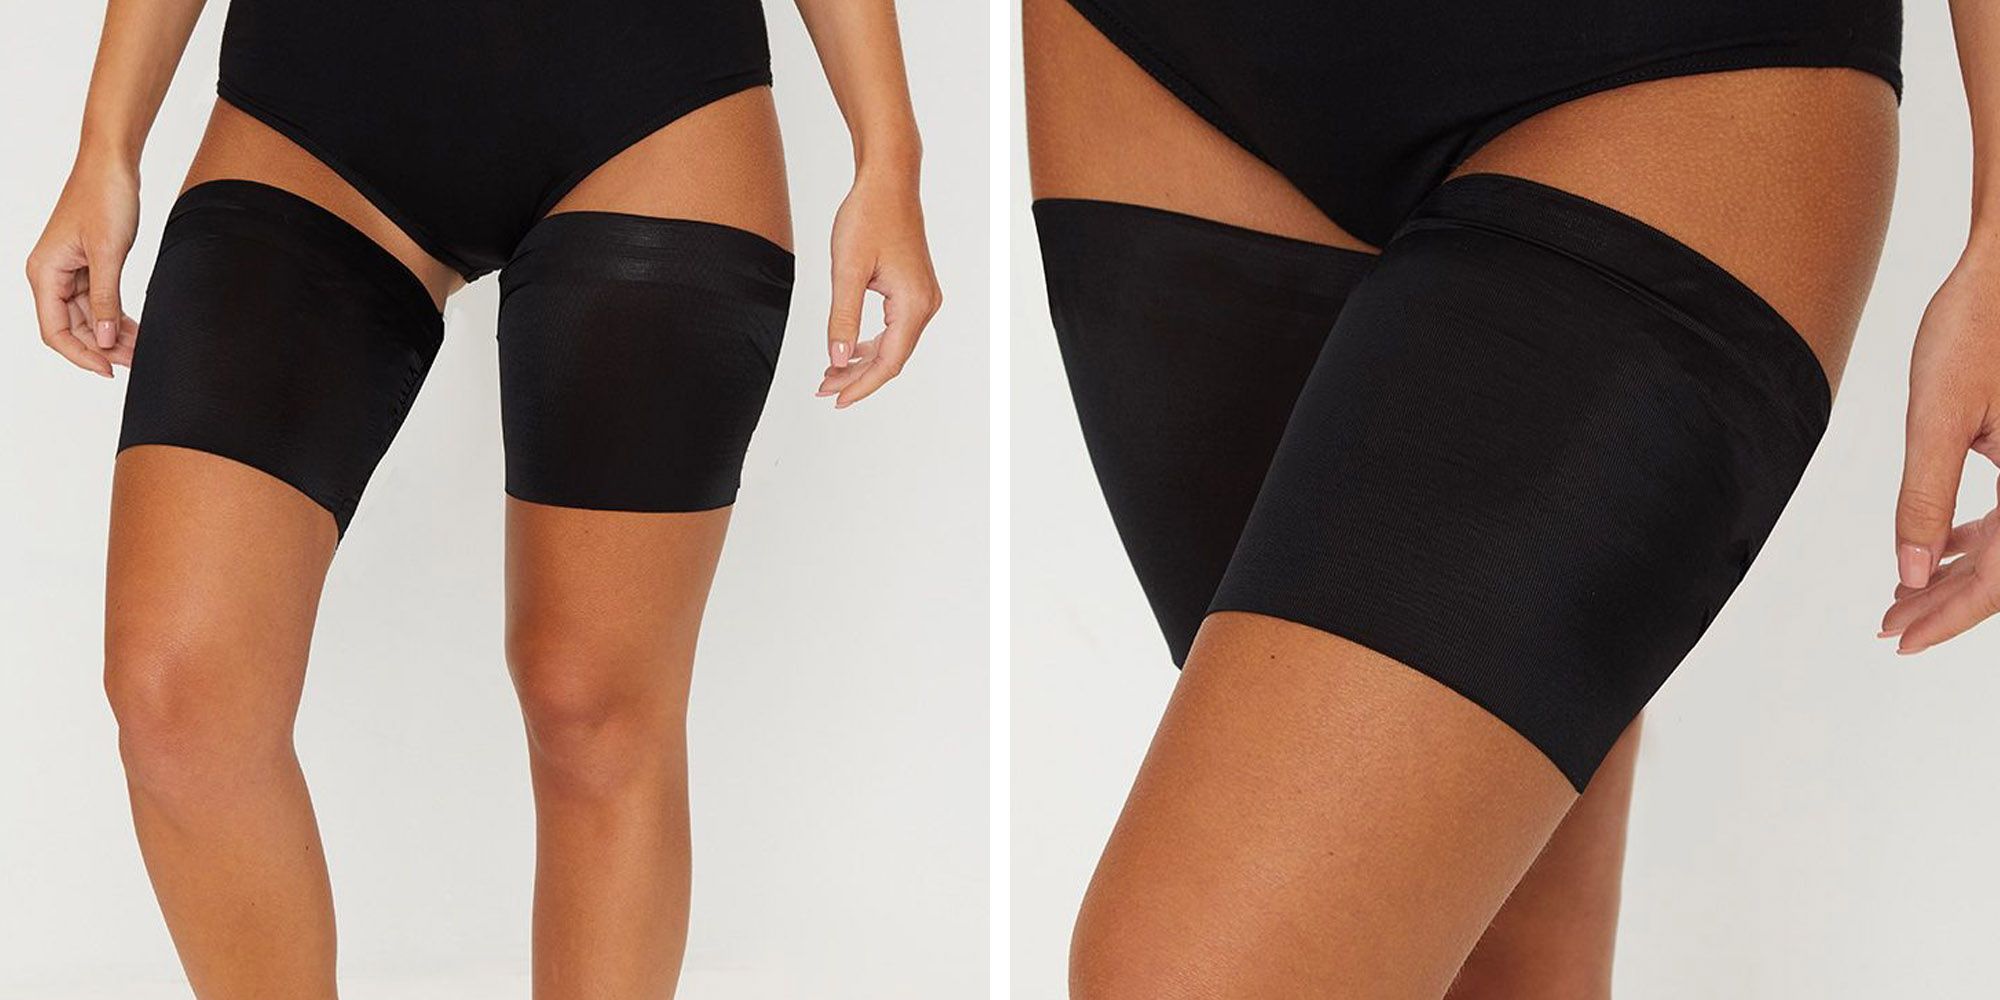 These Anti-Chafing Bands Are Here to Save Your Thighs This Summer